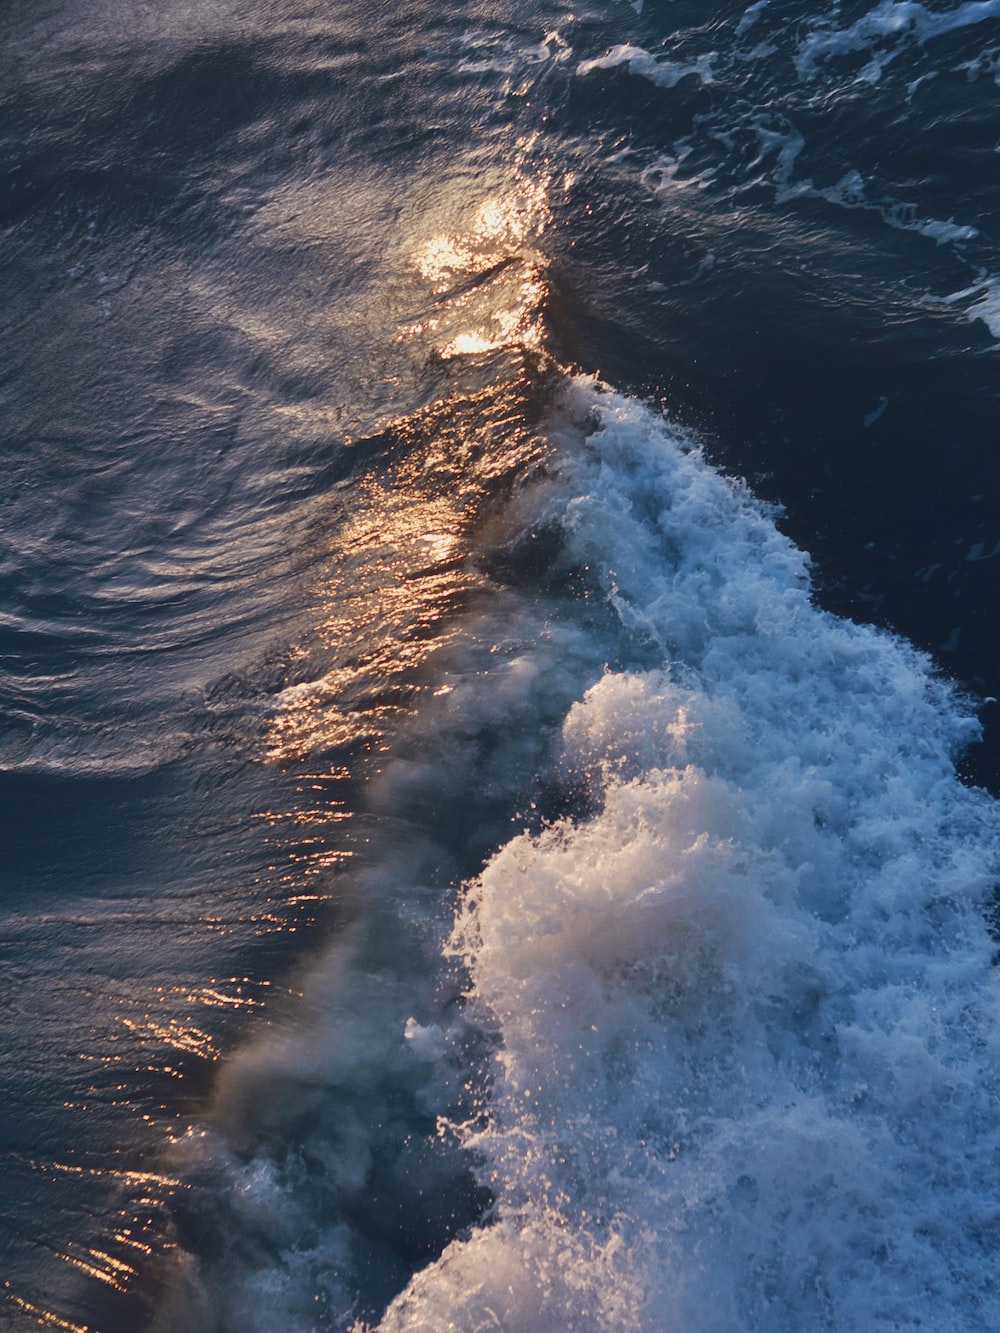 The wake of a boat in the ocean photo